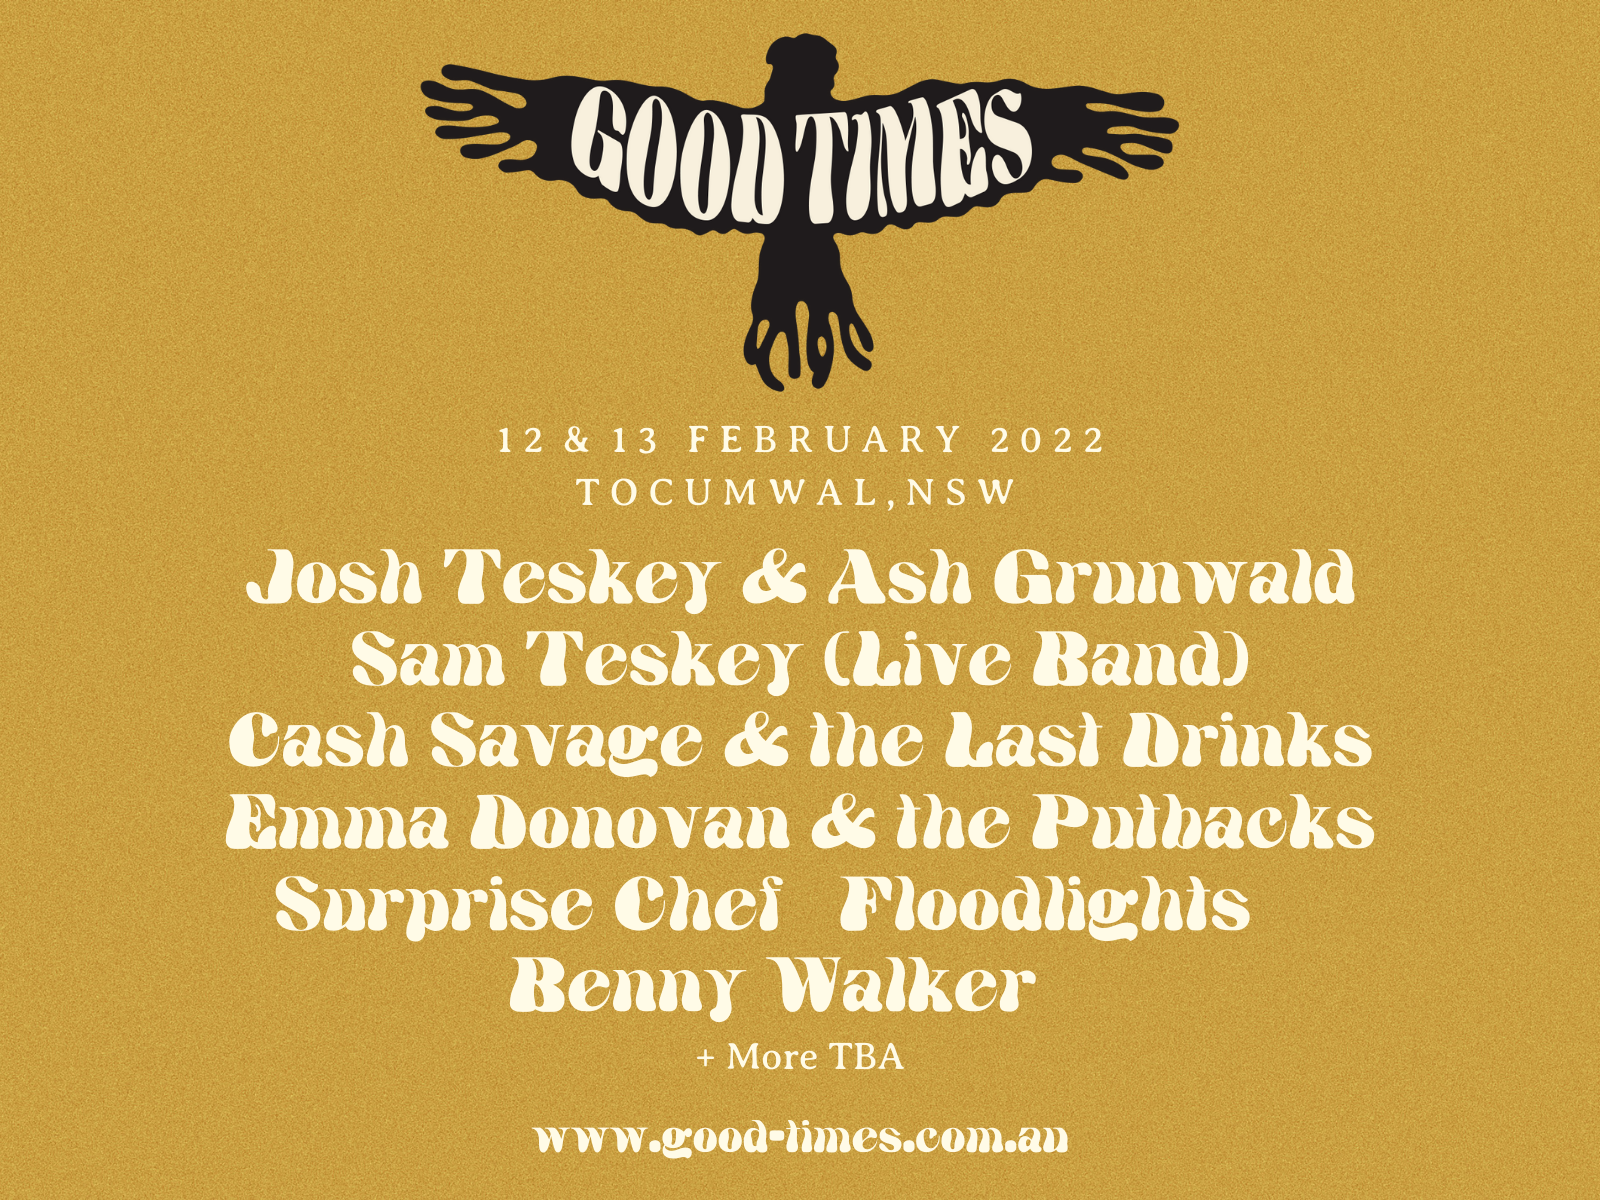 Good Times Festival New 2022 Date & Line Up Announcement